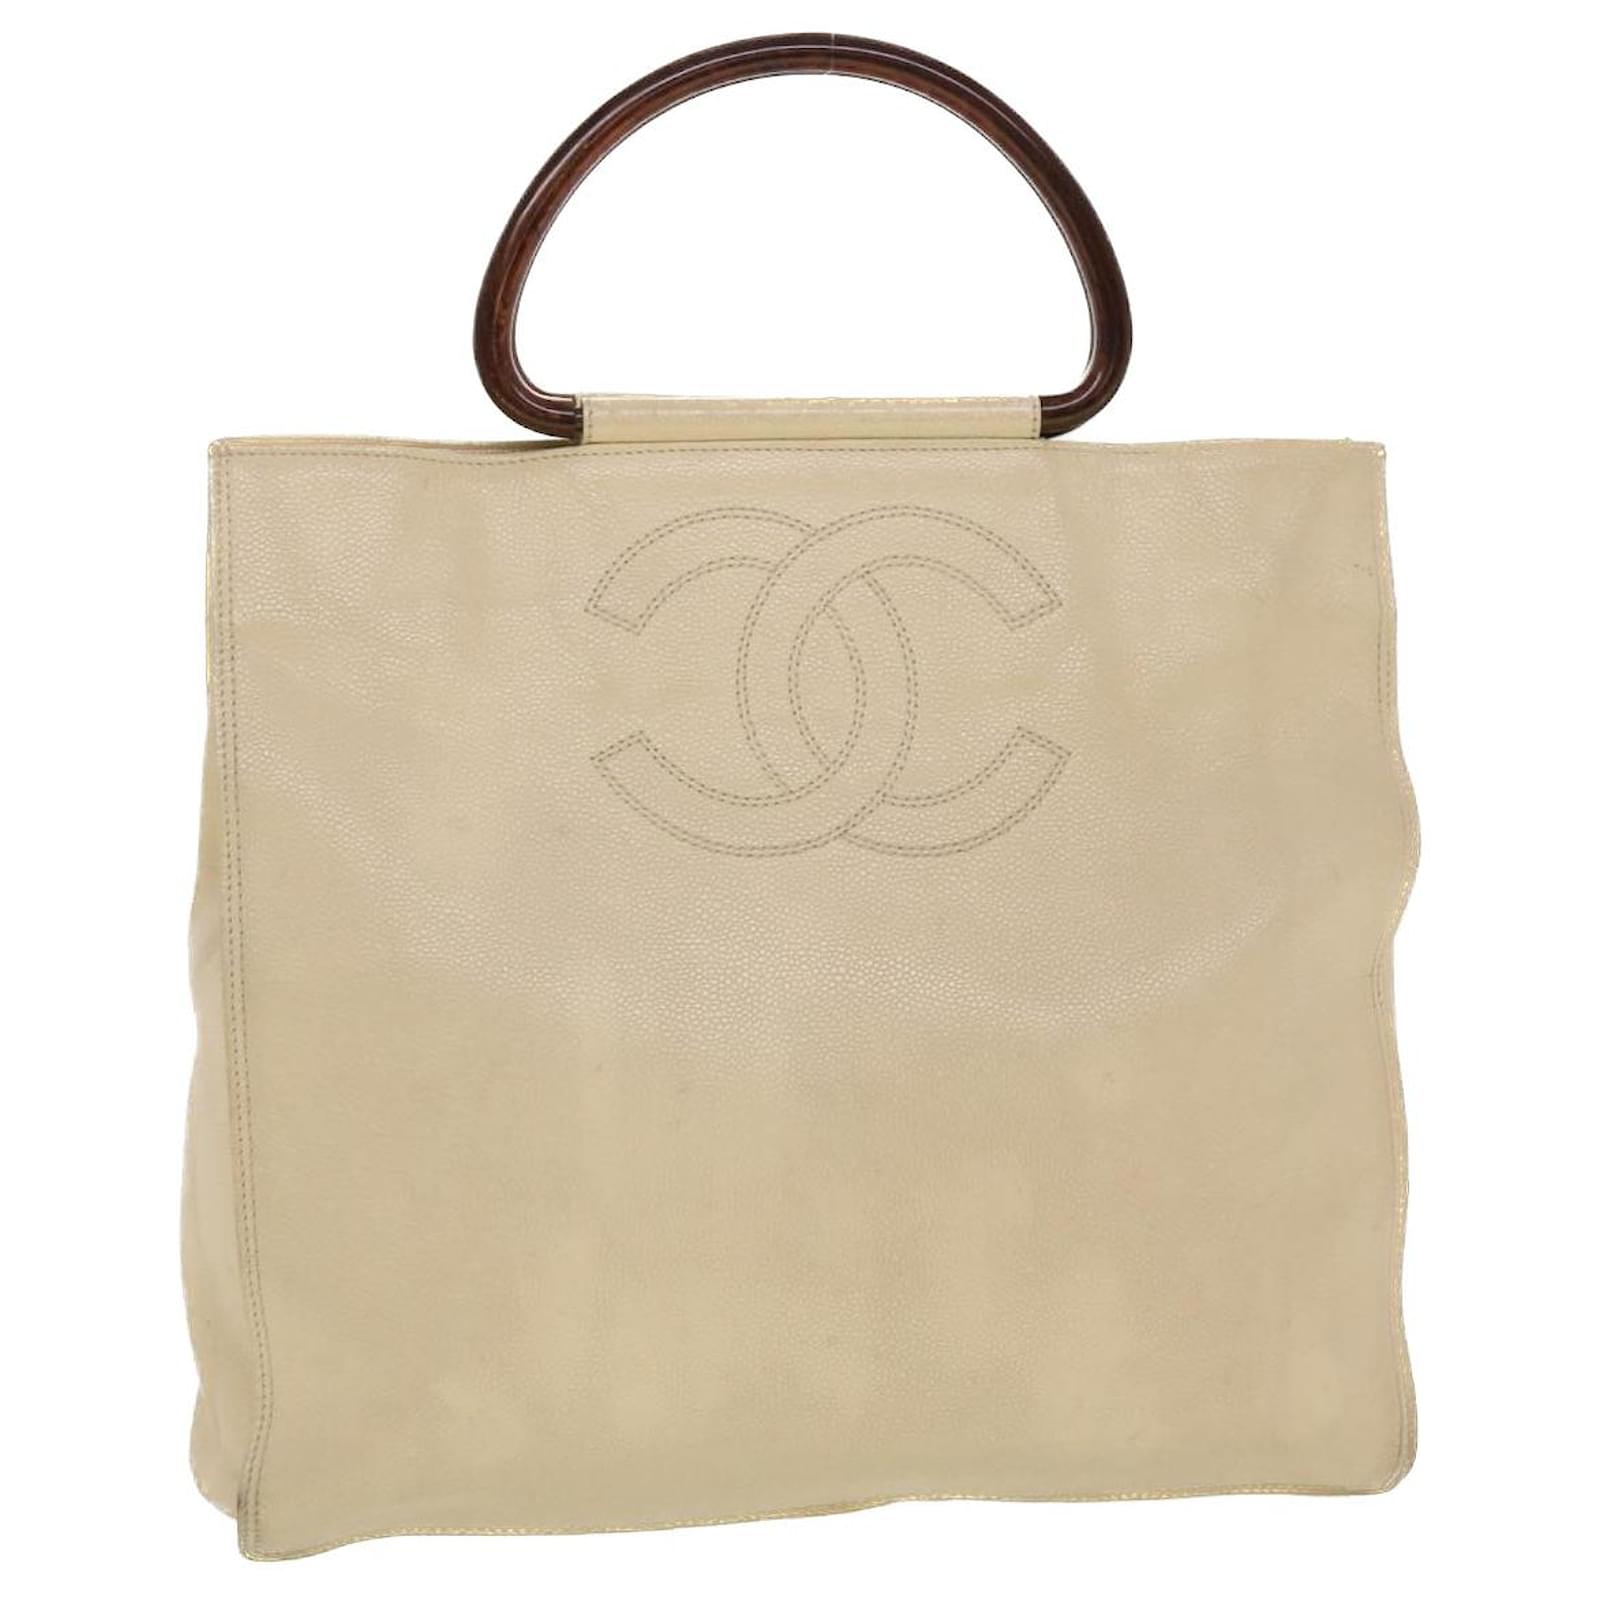 brand new chanel tote bag